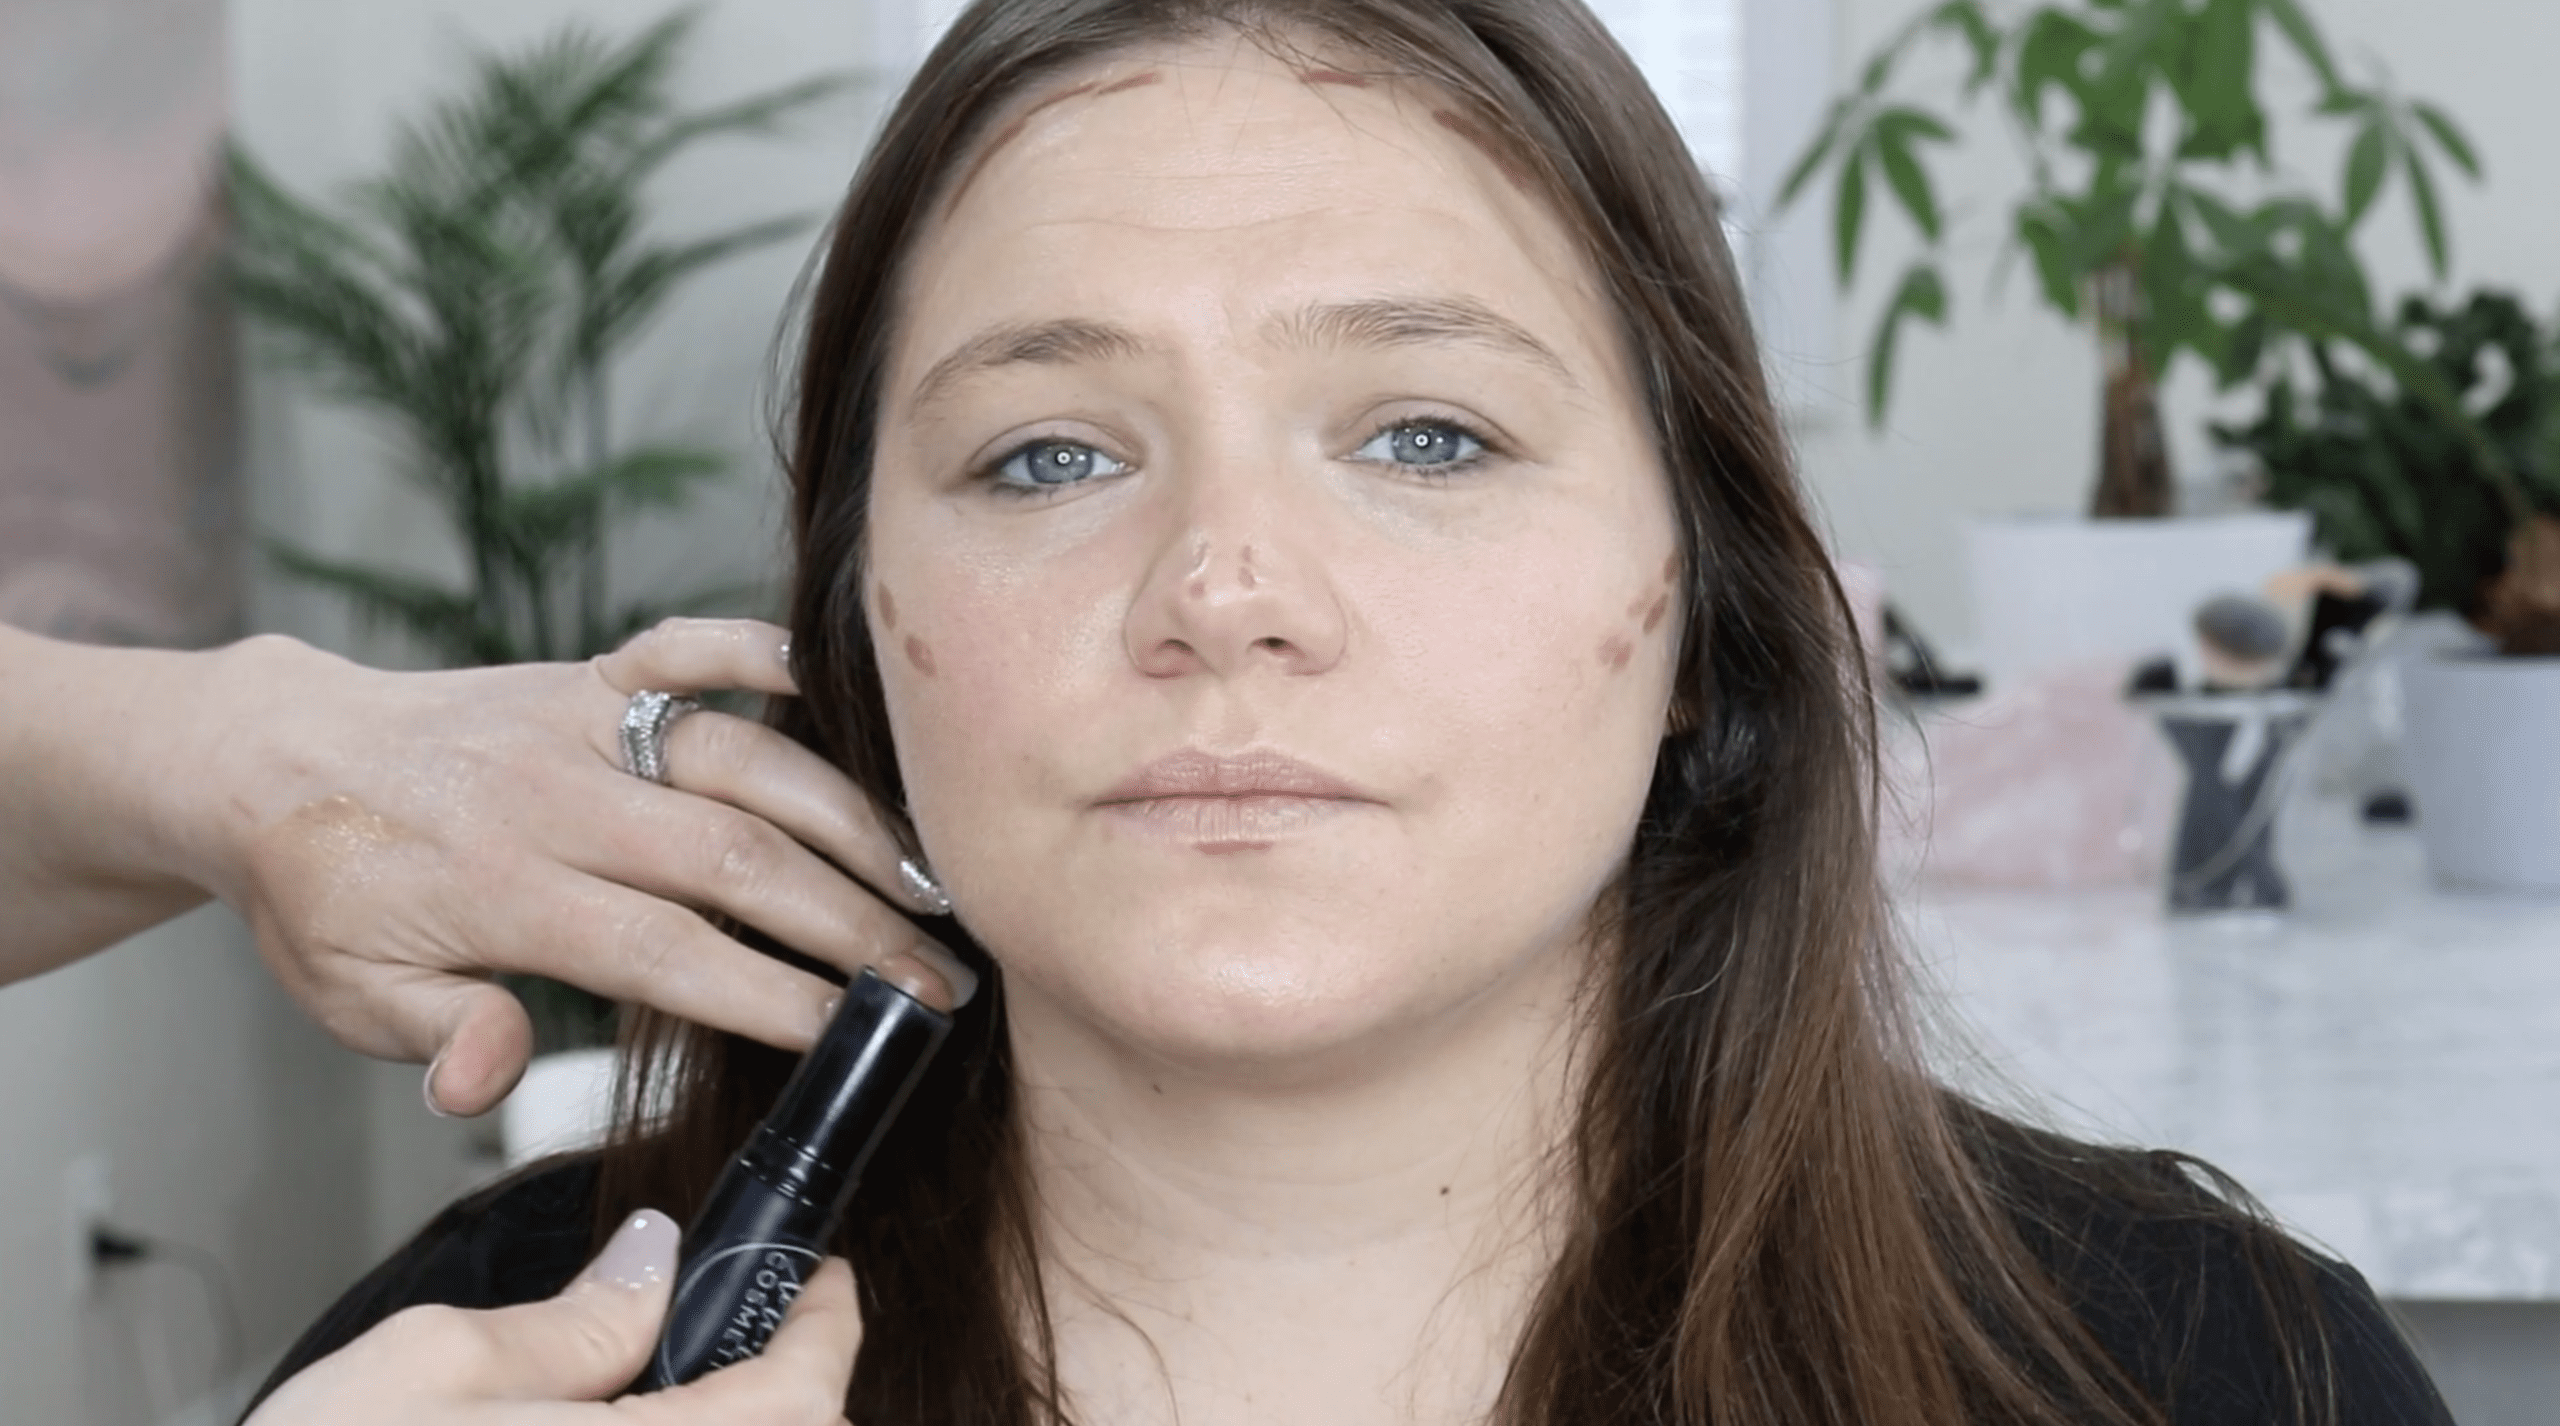 full face makeup tutorial step by step pictures